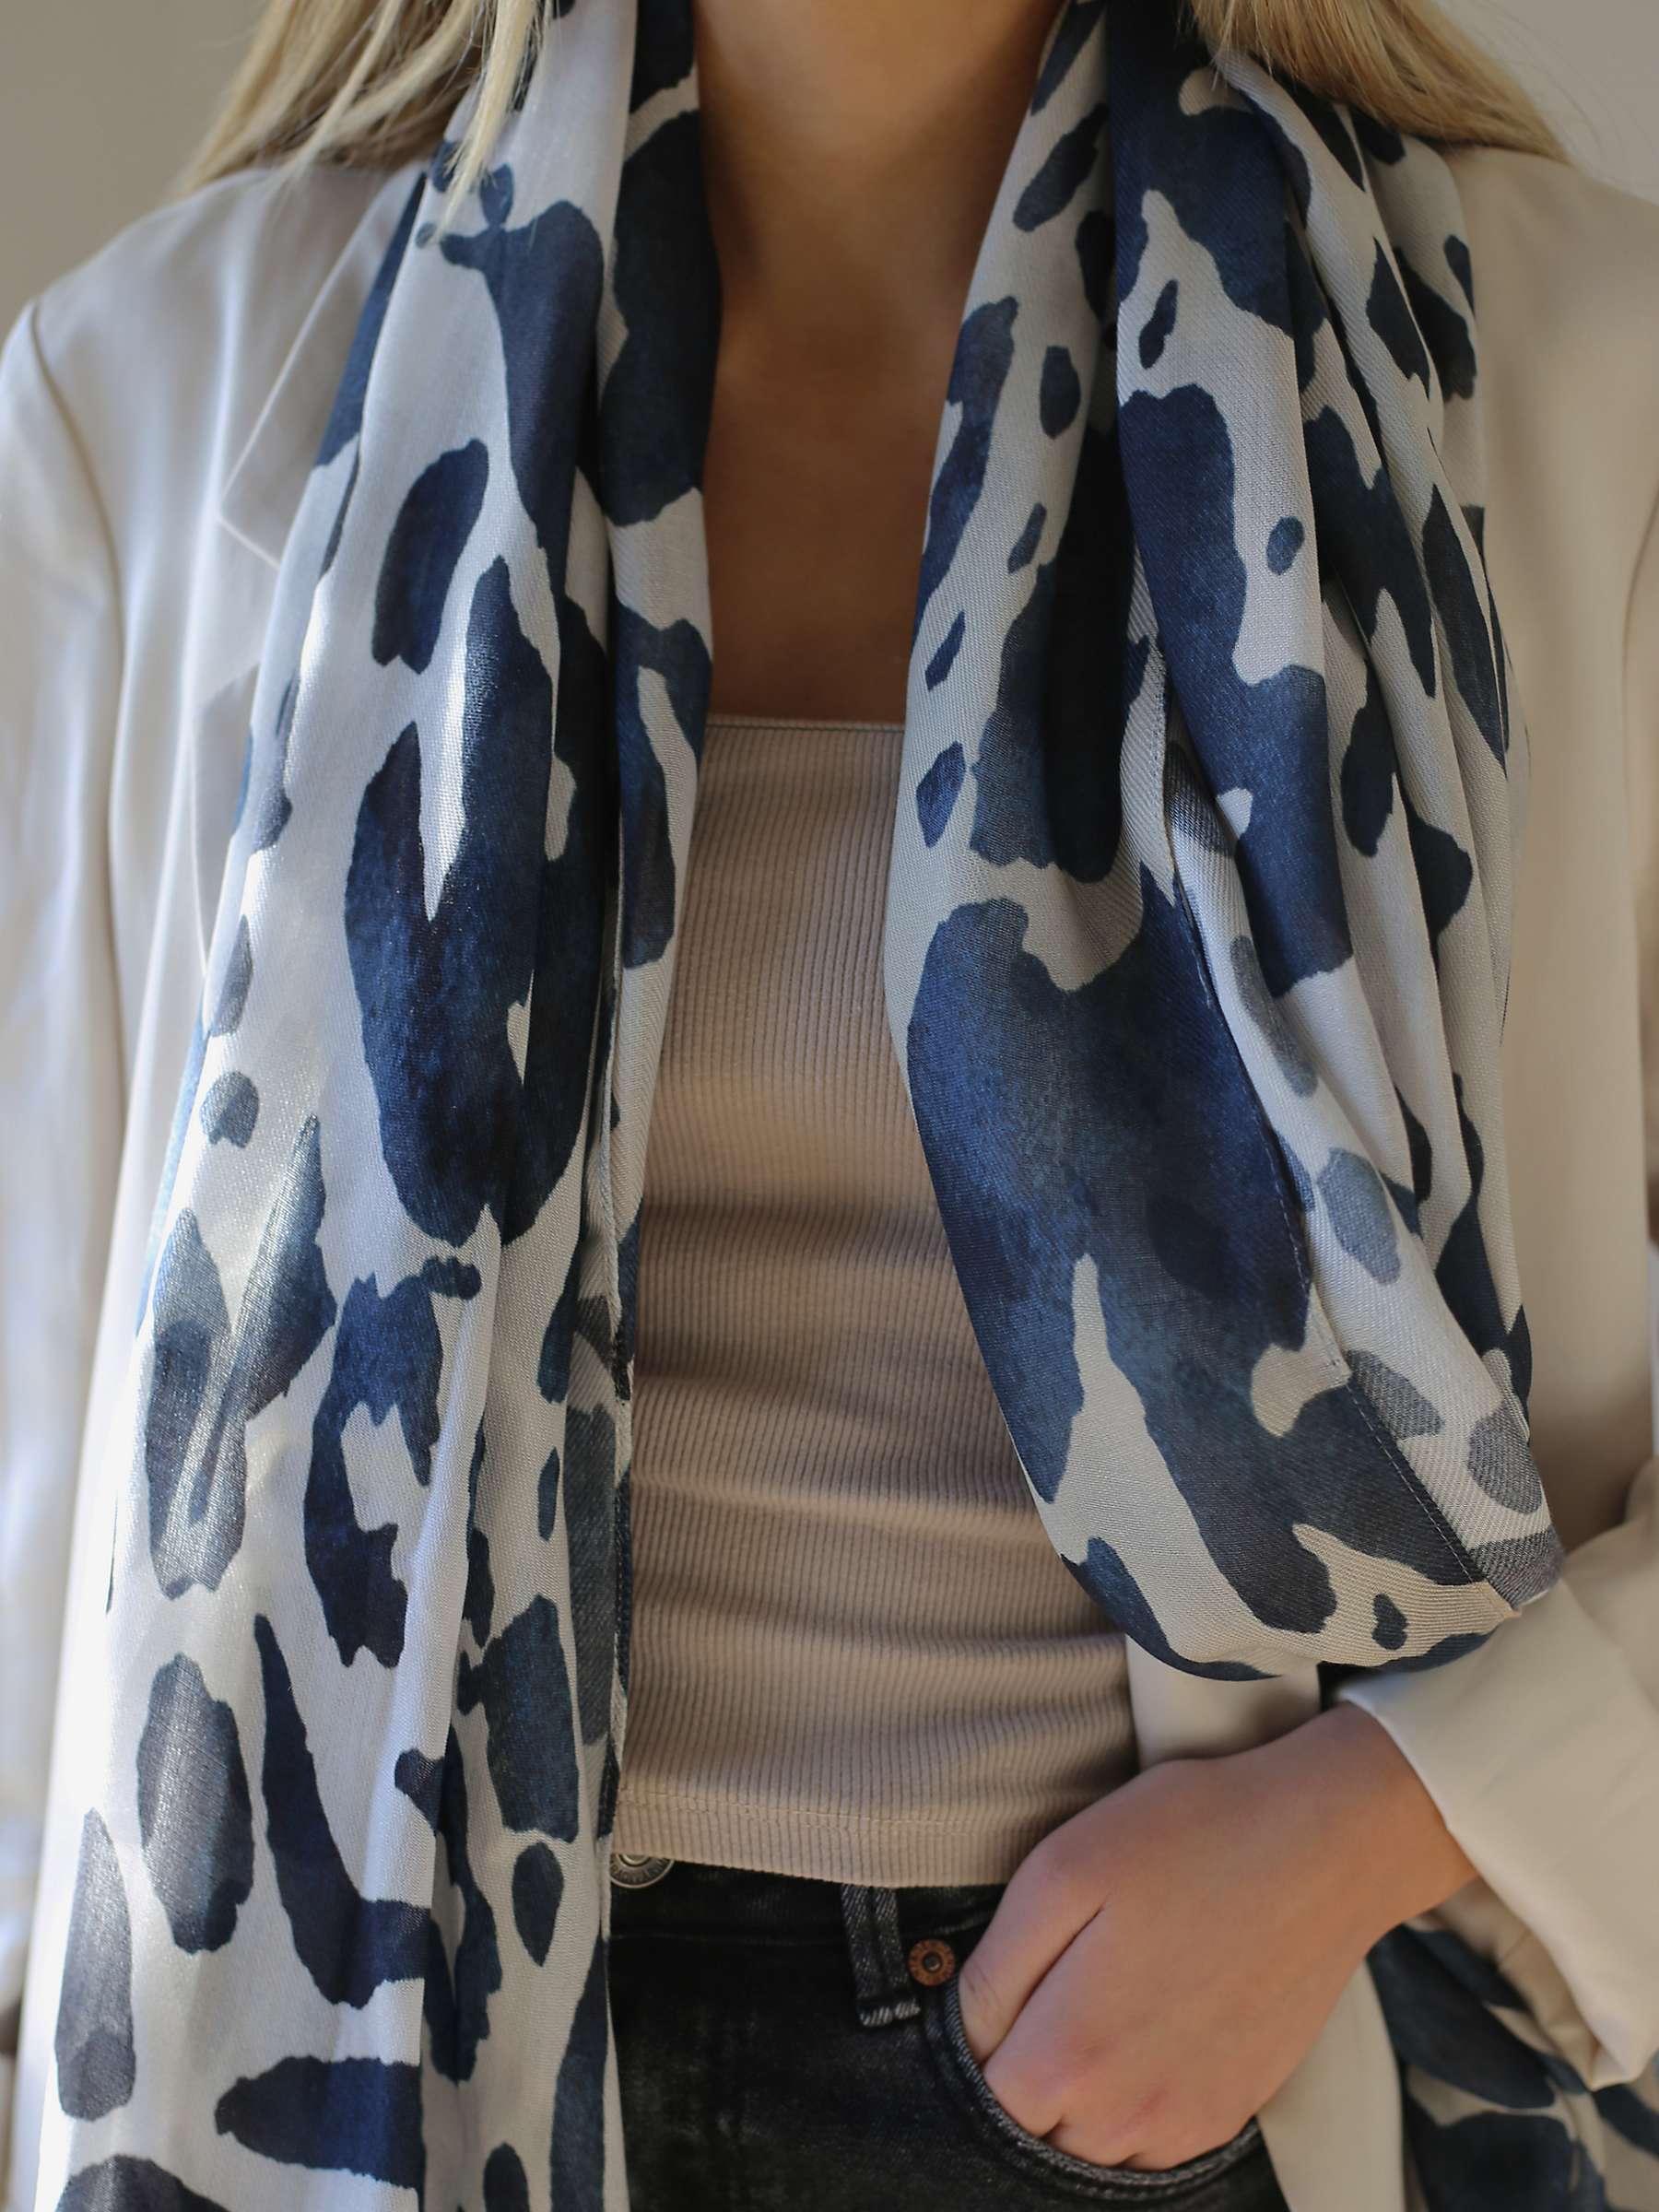 Buy Tutti & Co Cypress Scarf, Stone/Multi Online at johnlewis.com